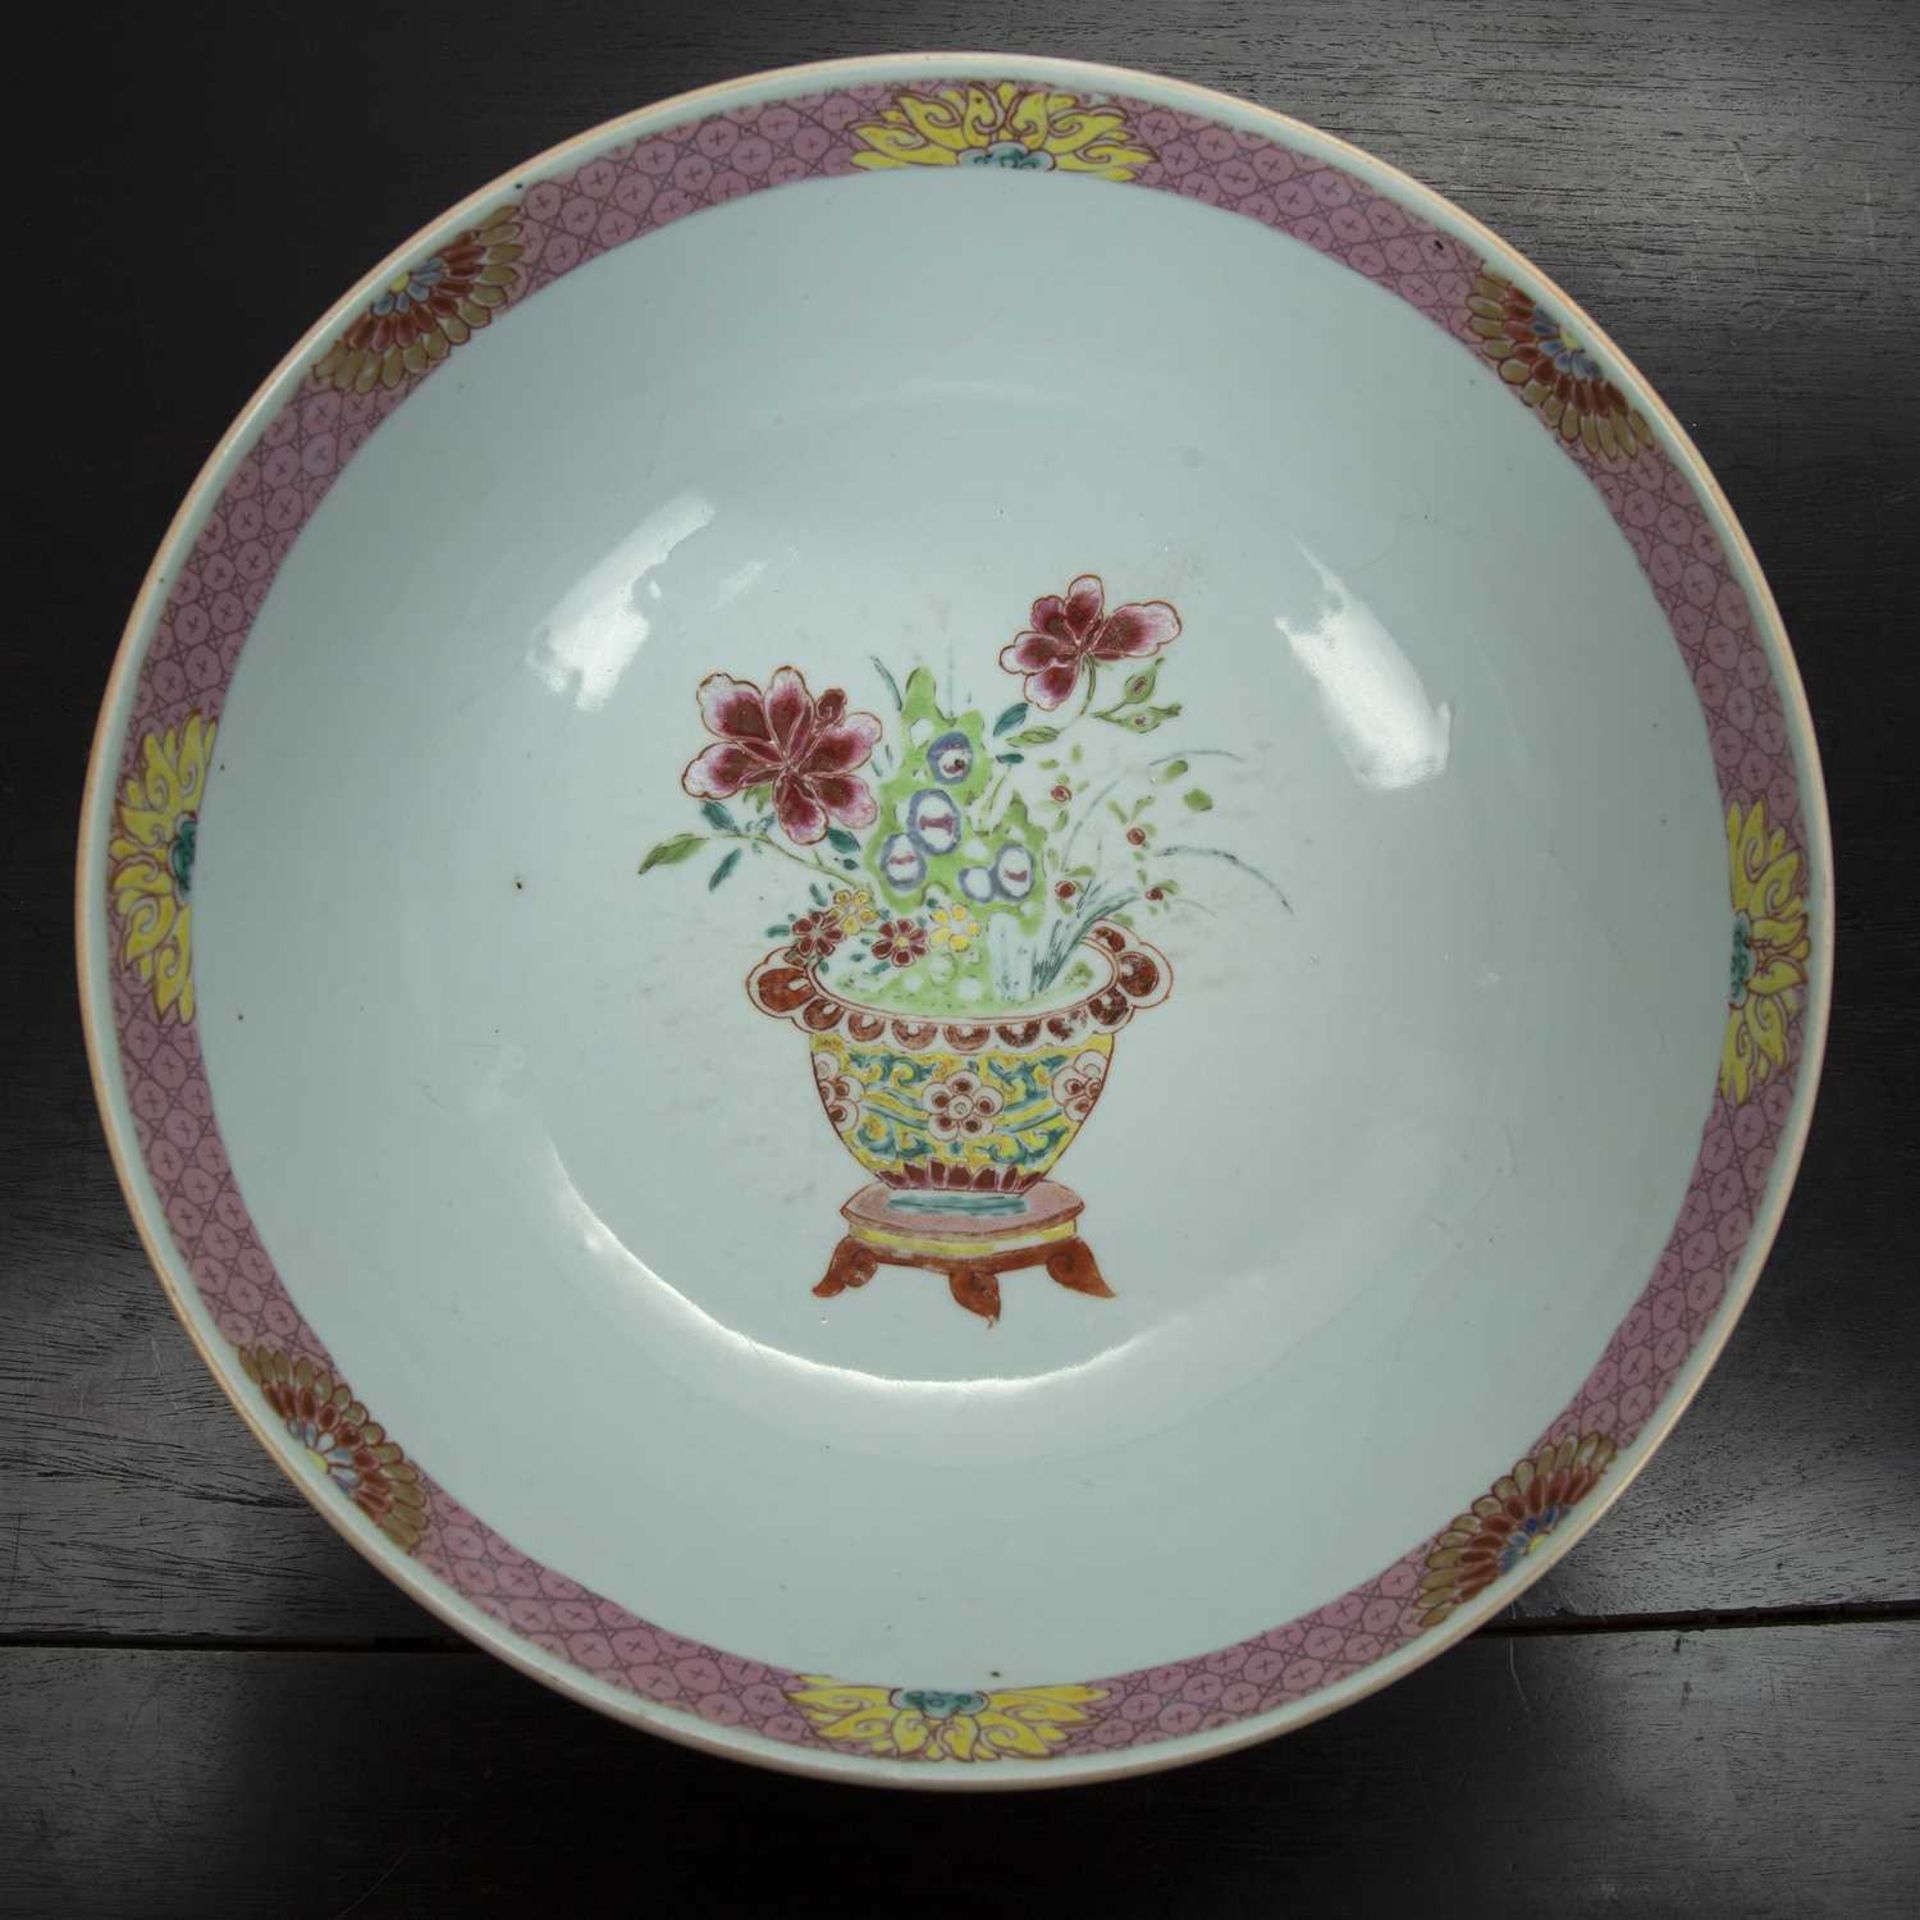 Famille rose bowl Chinese, 18th Century painted in enamels with baskets of flowers around the edge - Image 5 of 6